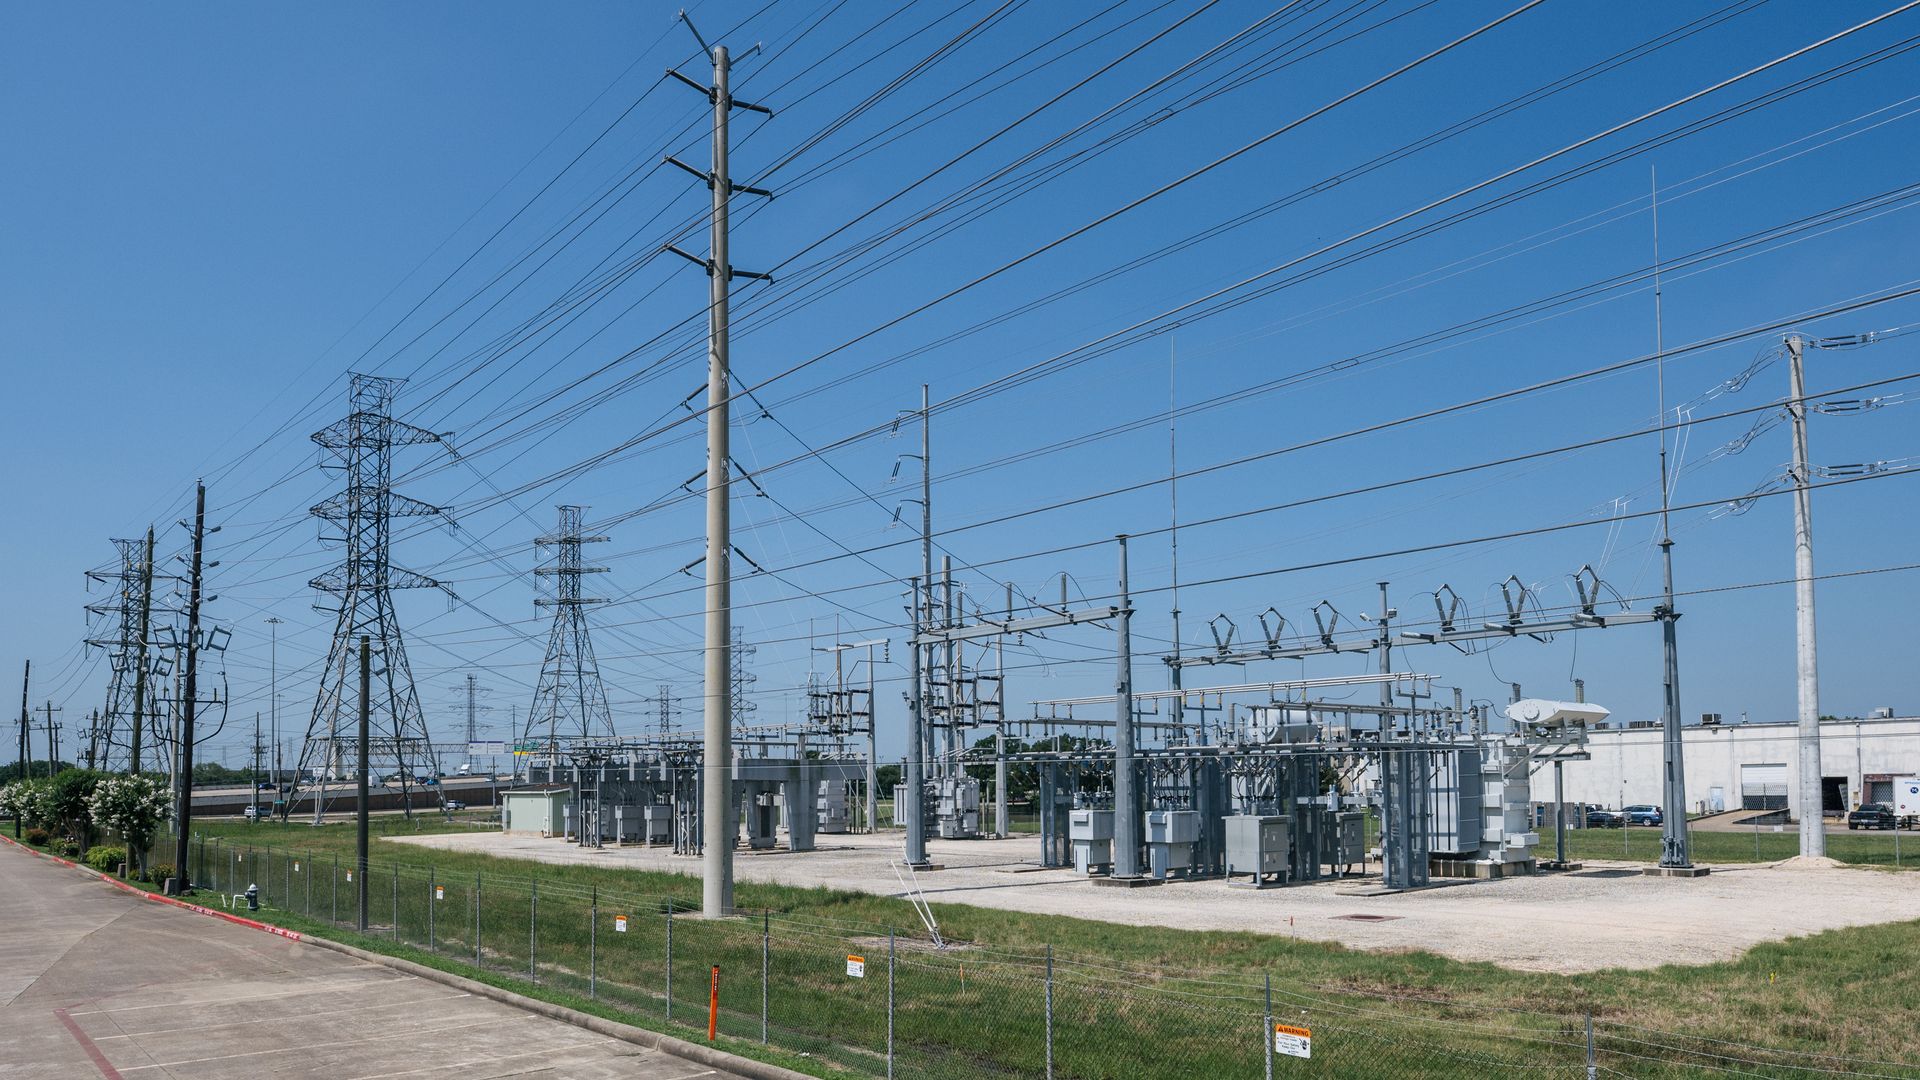 A power station in Texas